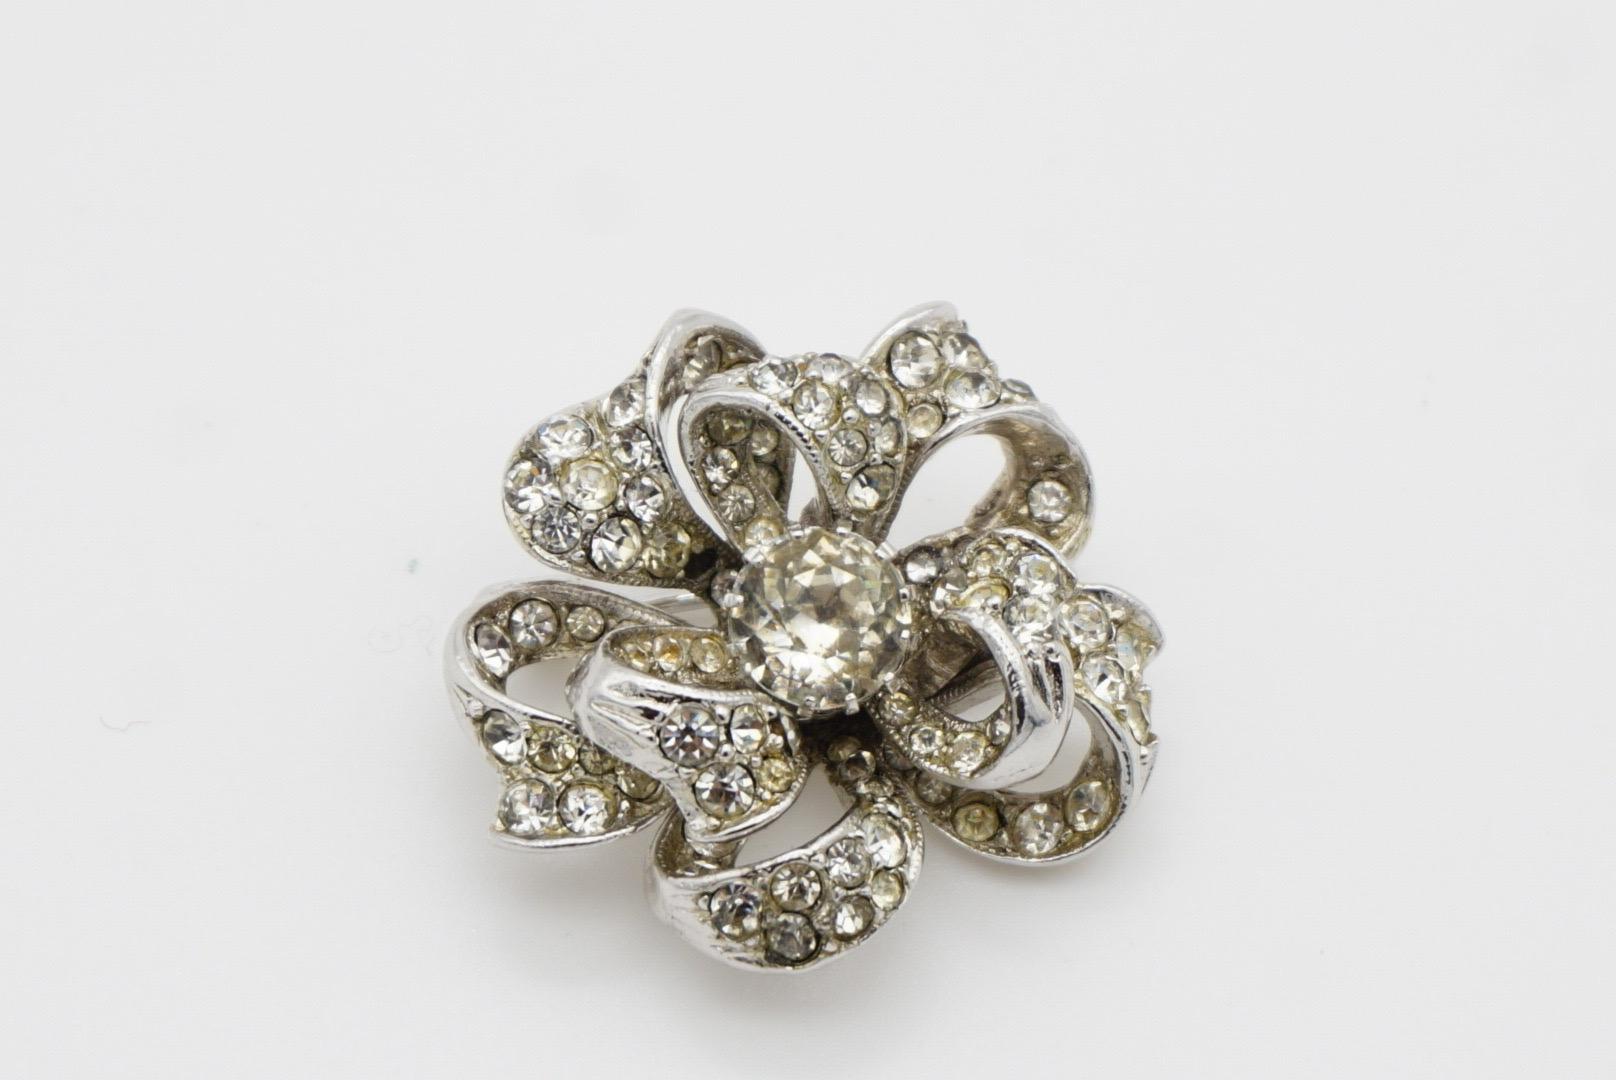 Christian Dior by Mitchel Maer for Christian Dior for Christian Dior for Christian Dior for Christian Dior by Mitchel Maer for Christian Dior for Christian Dior 1950s Crystals Double Layer Flower Silver Brooch en vente 4